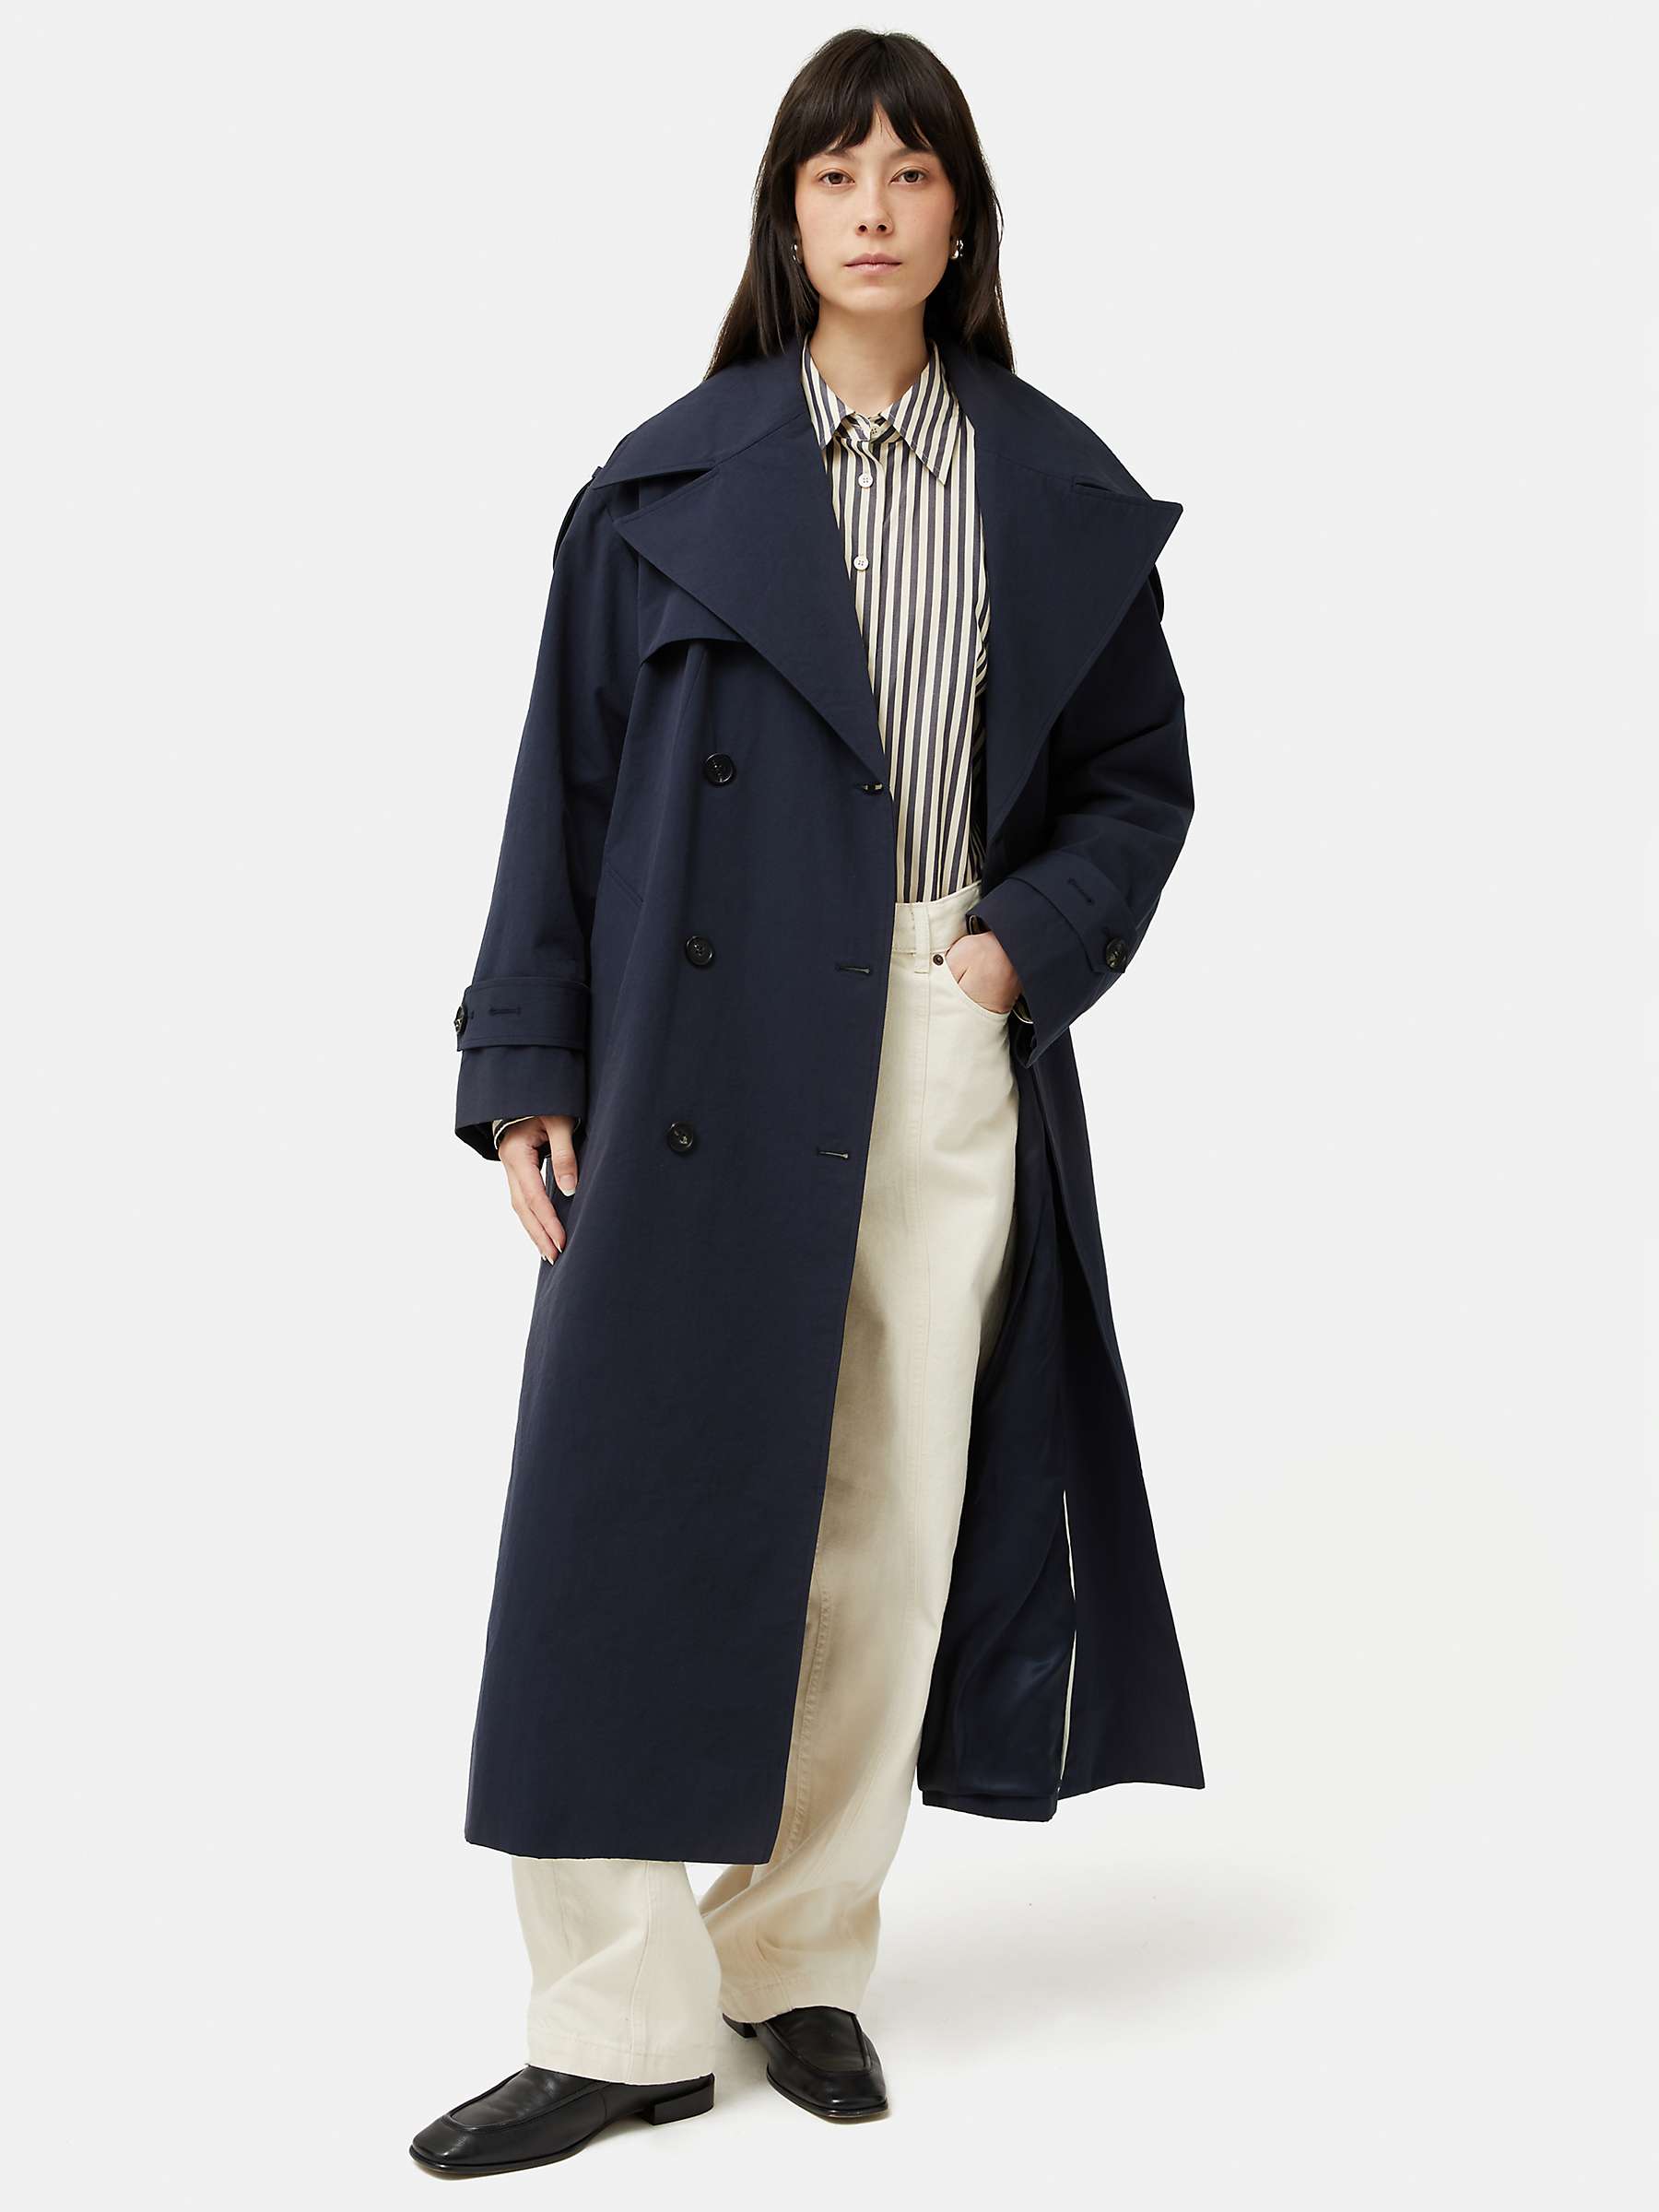 Buy Jigsaw Nelson Trench Coat, Navy Online at johnlewis.com